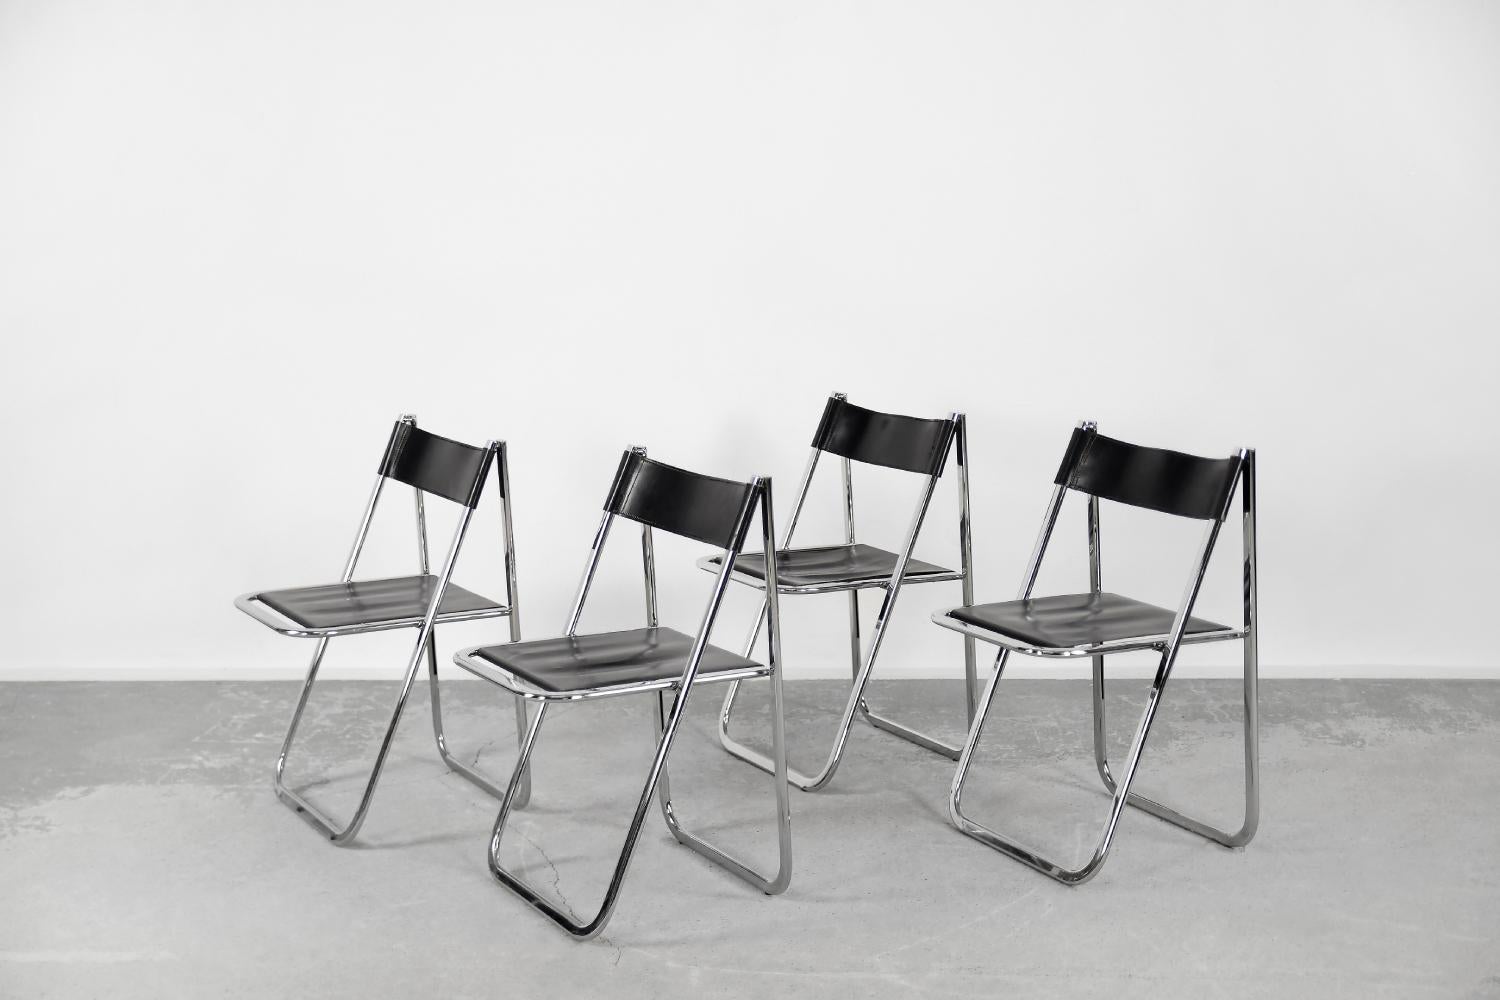 This set of four Tamara chairs was manufactured by the Italian Arrben factory during the 1970s. The frame is made of a chrome-plated metal. The seat and backrest are upholstered with high-quality black natural leather. The minimalist form of the